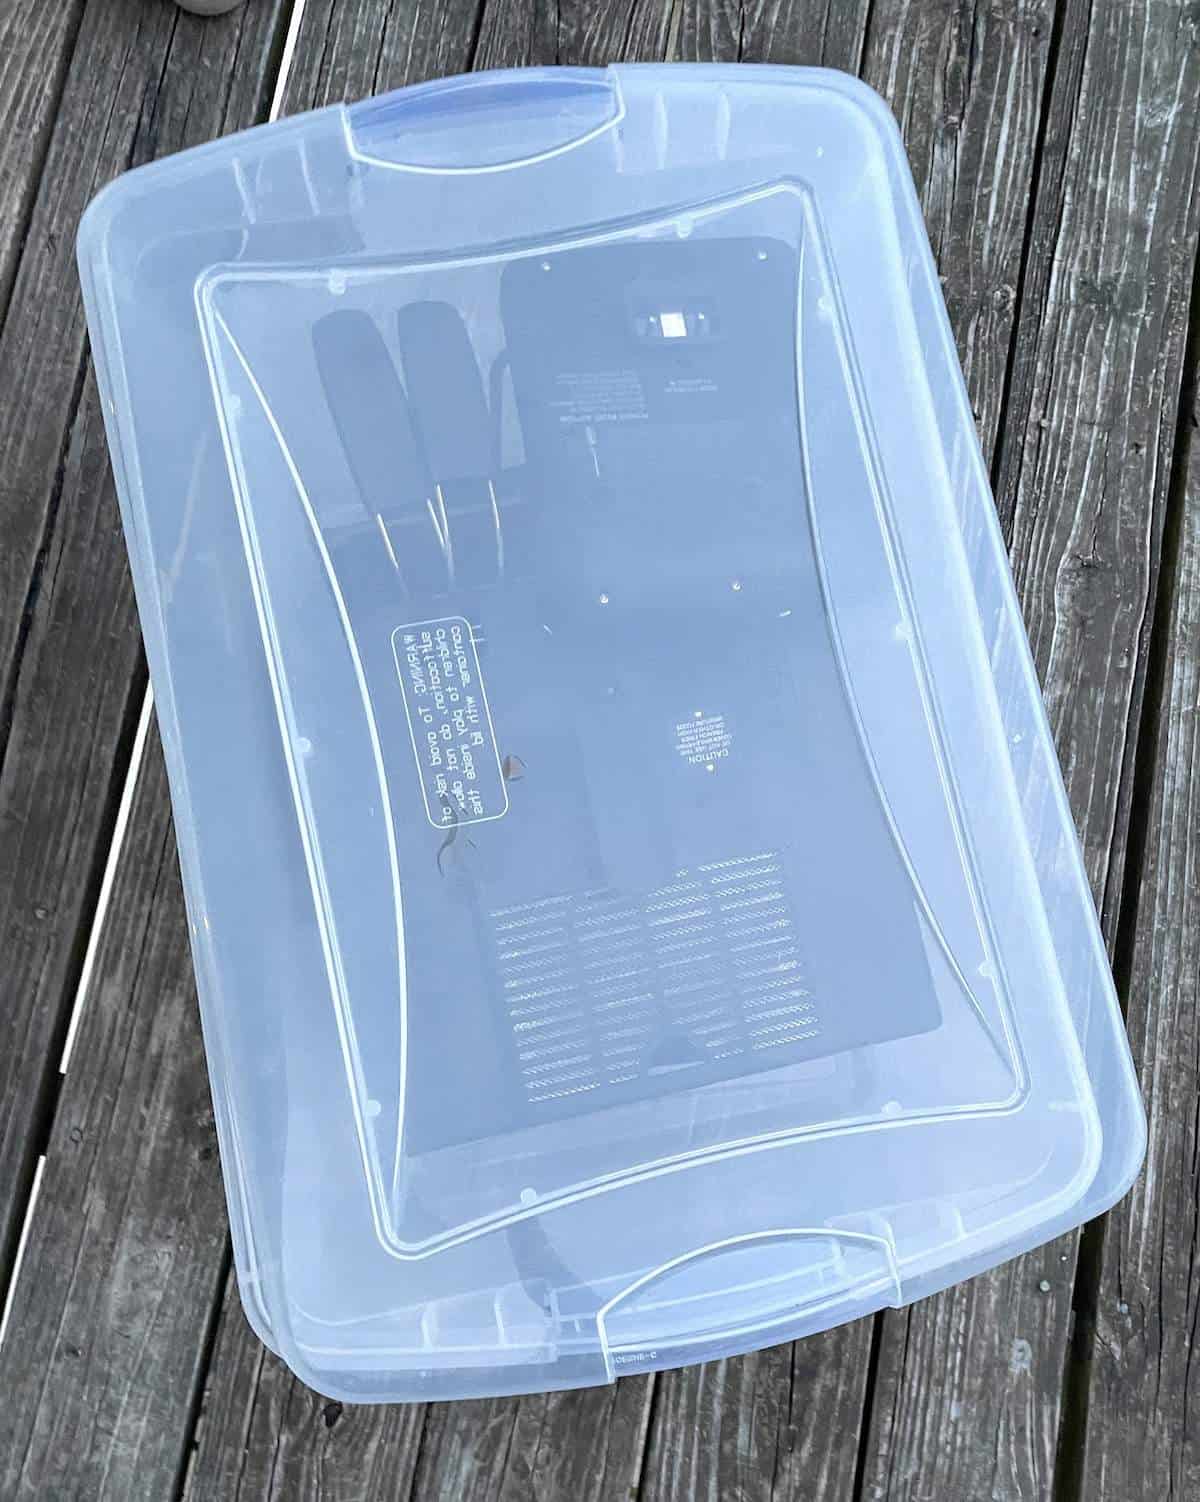 A clear plastic tote with a deep fryer stored inside of it.